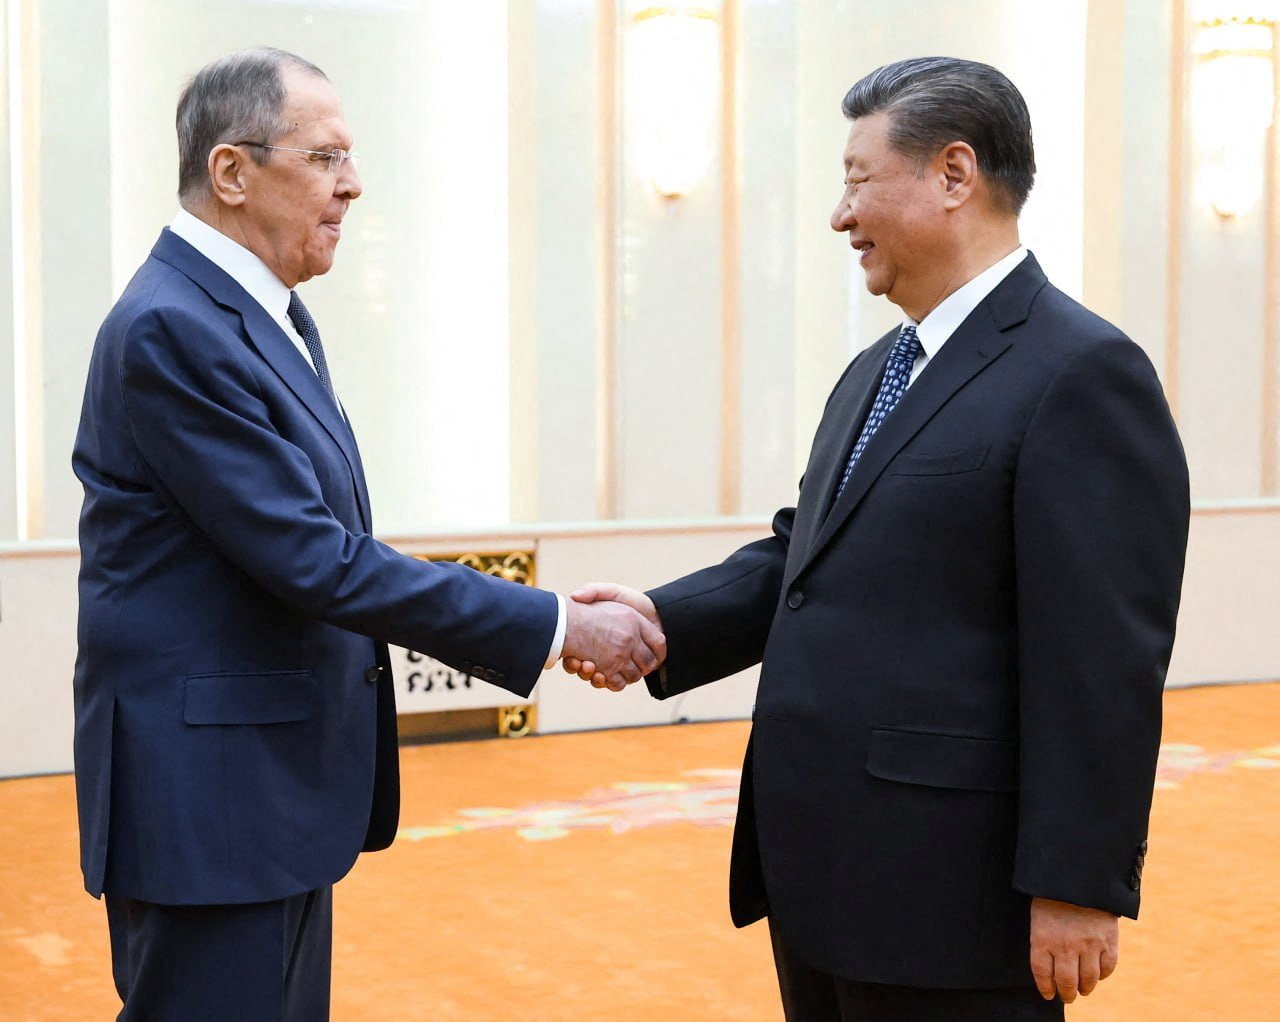 Russian Foreign Minister Sergei Lavrov greets with Chinese leader Xi Jinping in Beijing on Tuesday. Photo: Russian Foreign Ministry/Handout via Reuters